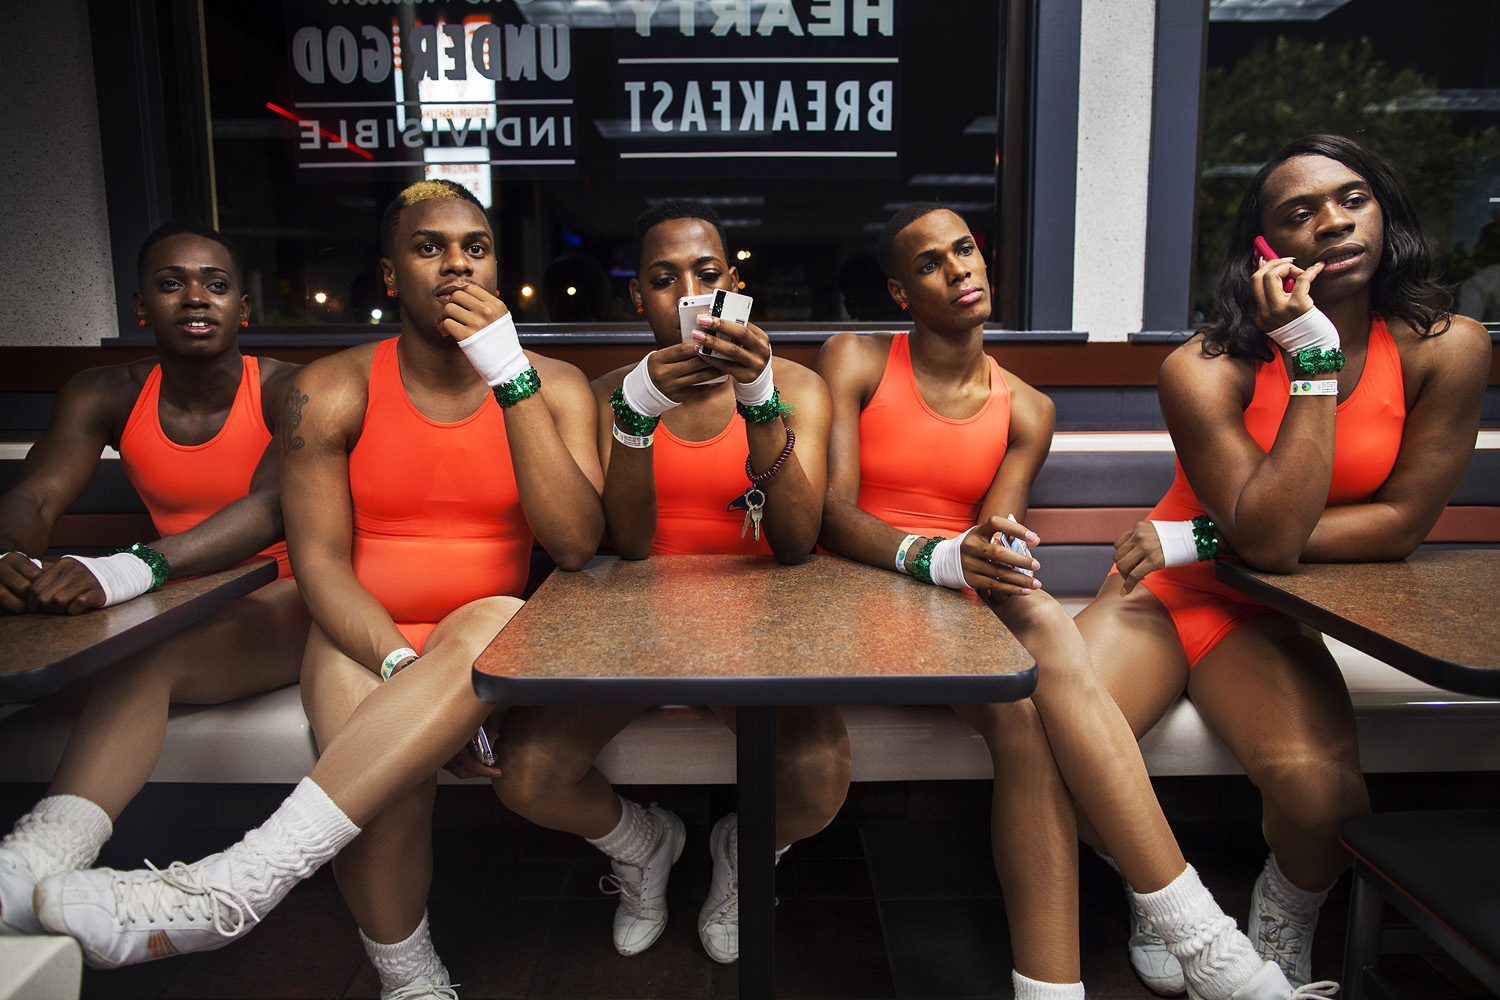 (L-R) KJ, Kentrell, Jerel, Adrian and Tim/Tamara sit in a fast food restaurant to regroup before driving back to Mobile after a night out at a gay club in Pensacola. The group frequents gay clubs in Mobile, and also travels to clubs in Pensecola. They rarely drink alcohol, often dress in matching uniforms, and use nights out at the club to practice their routines. They see clubbing as a means for self-promotion and an opportunity to perform and dance in front of audiences. The Prancing Elites are a group of young, gay, black men who practice J-Sette, a form of dance birthed at Historically Black Colleges that is characterized by sharp, cheerleading-style movements and hip-hop performed to an eight-count beat. Traditionally, men cannot join college dance teams, so young gay black men have been forming their own J-Sette "lines," organizing competitions, and creating their own outlets to practice this type of dance.